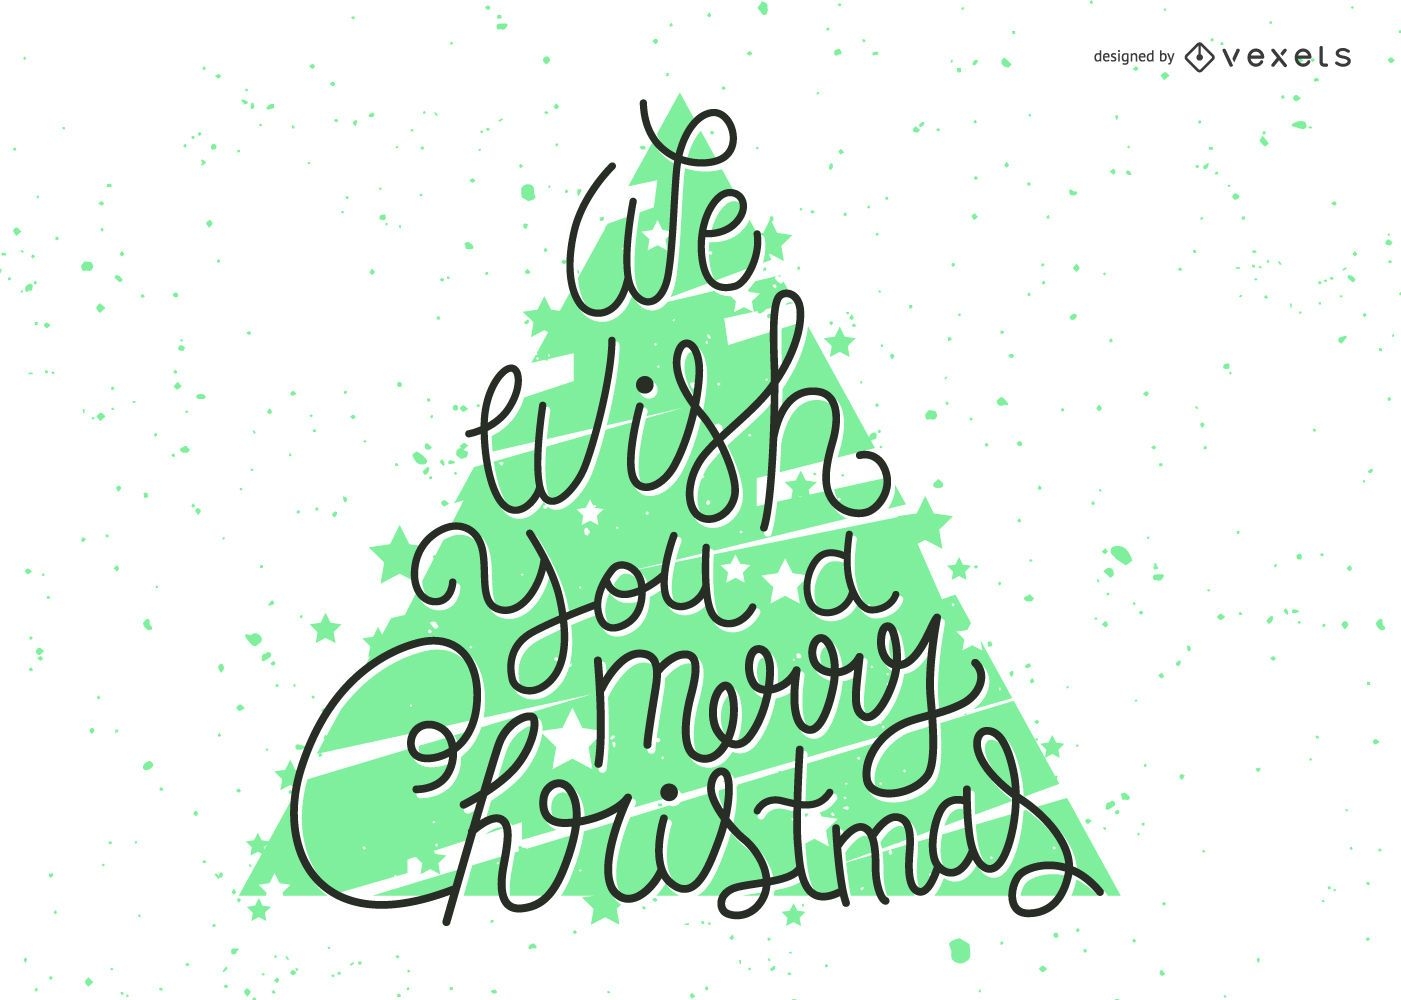 Bright Christmas wishes lettering